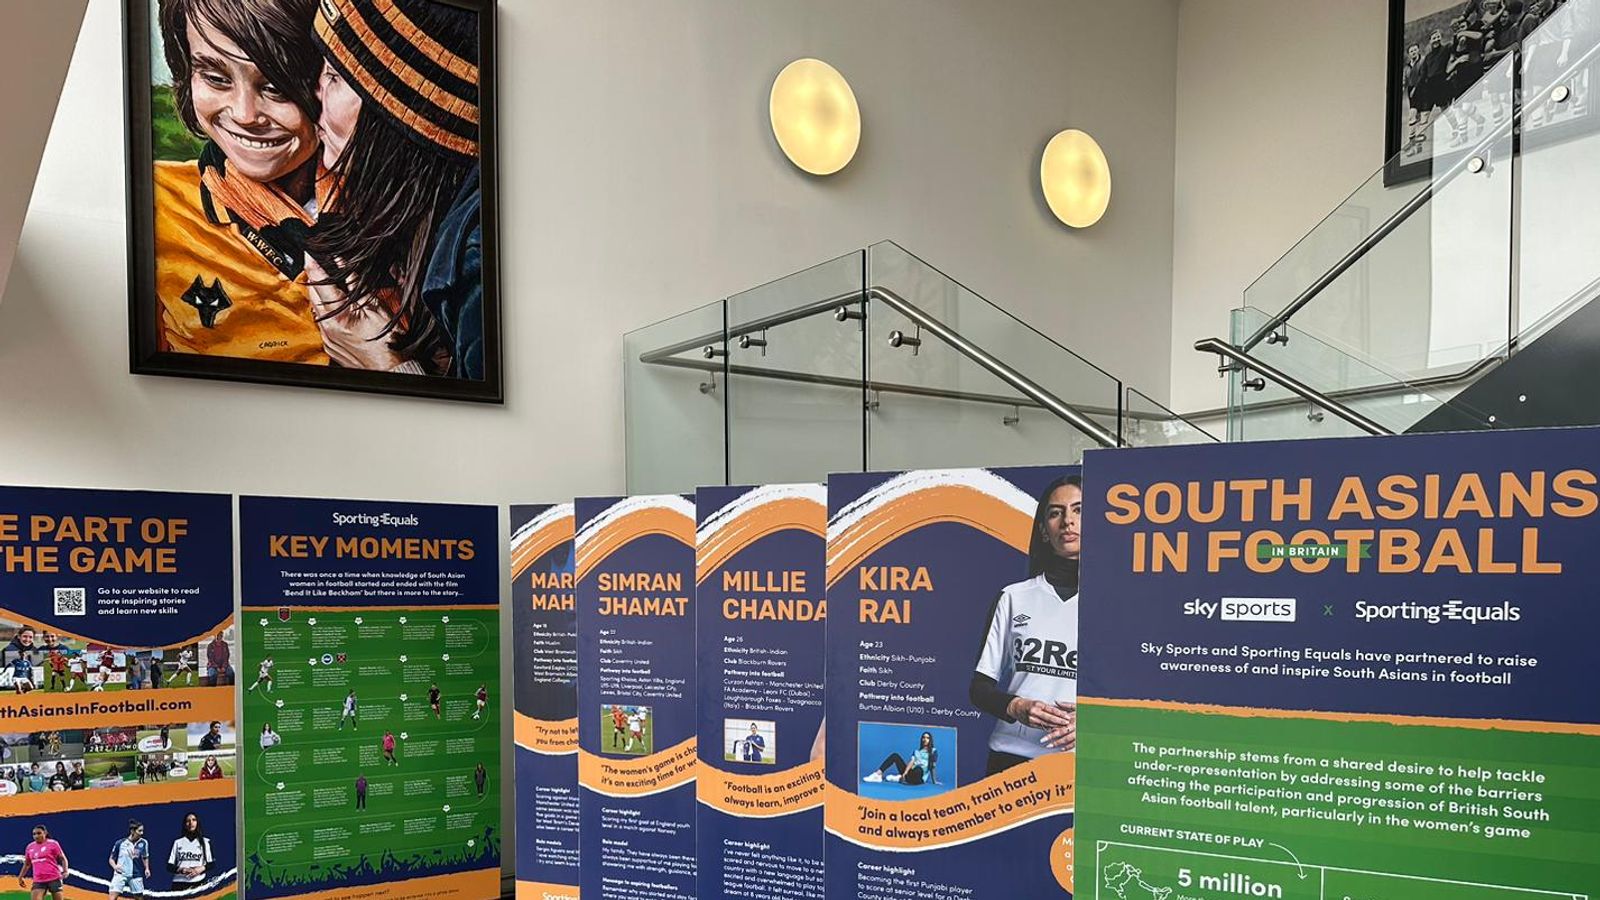 Wolves Museum hosts first-of-its-kind timeline documenting history of South Asian heritage female players in Britain | Football News